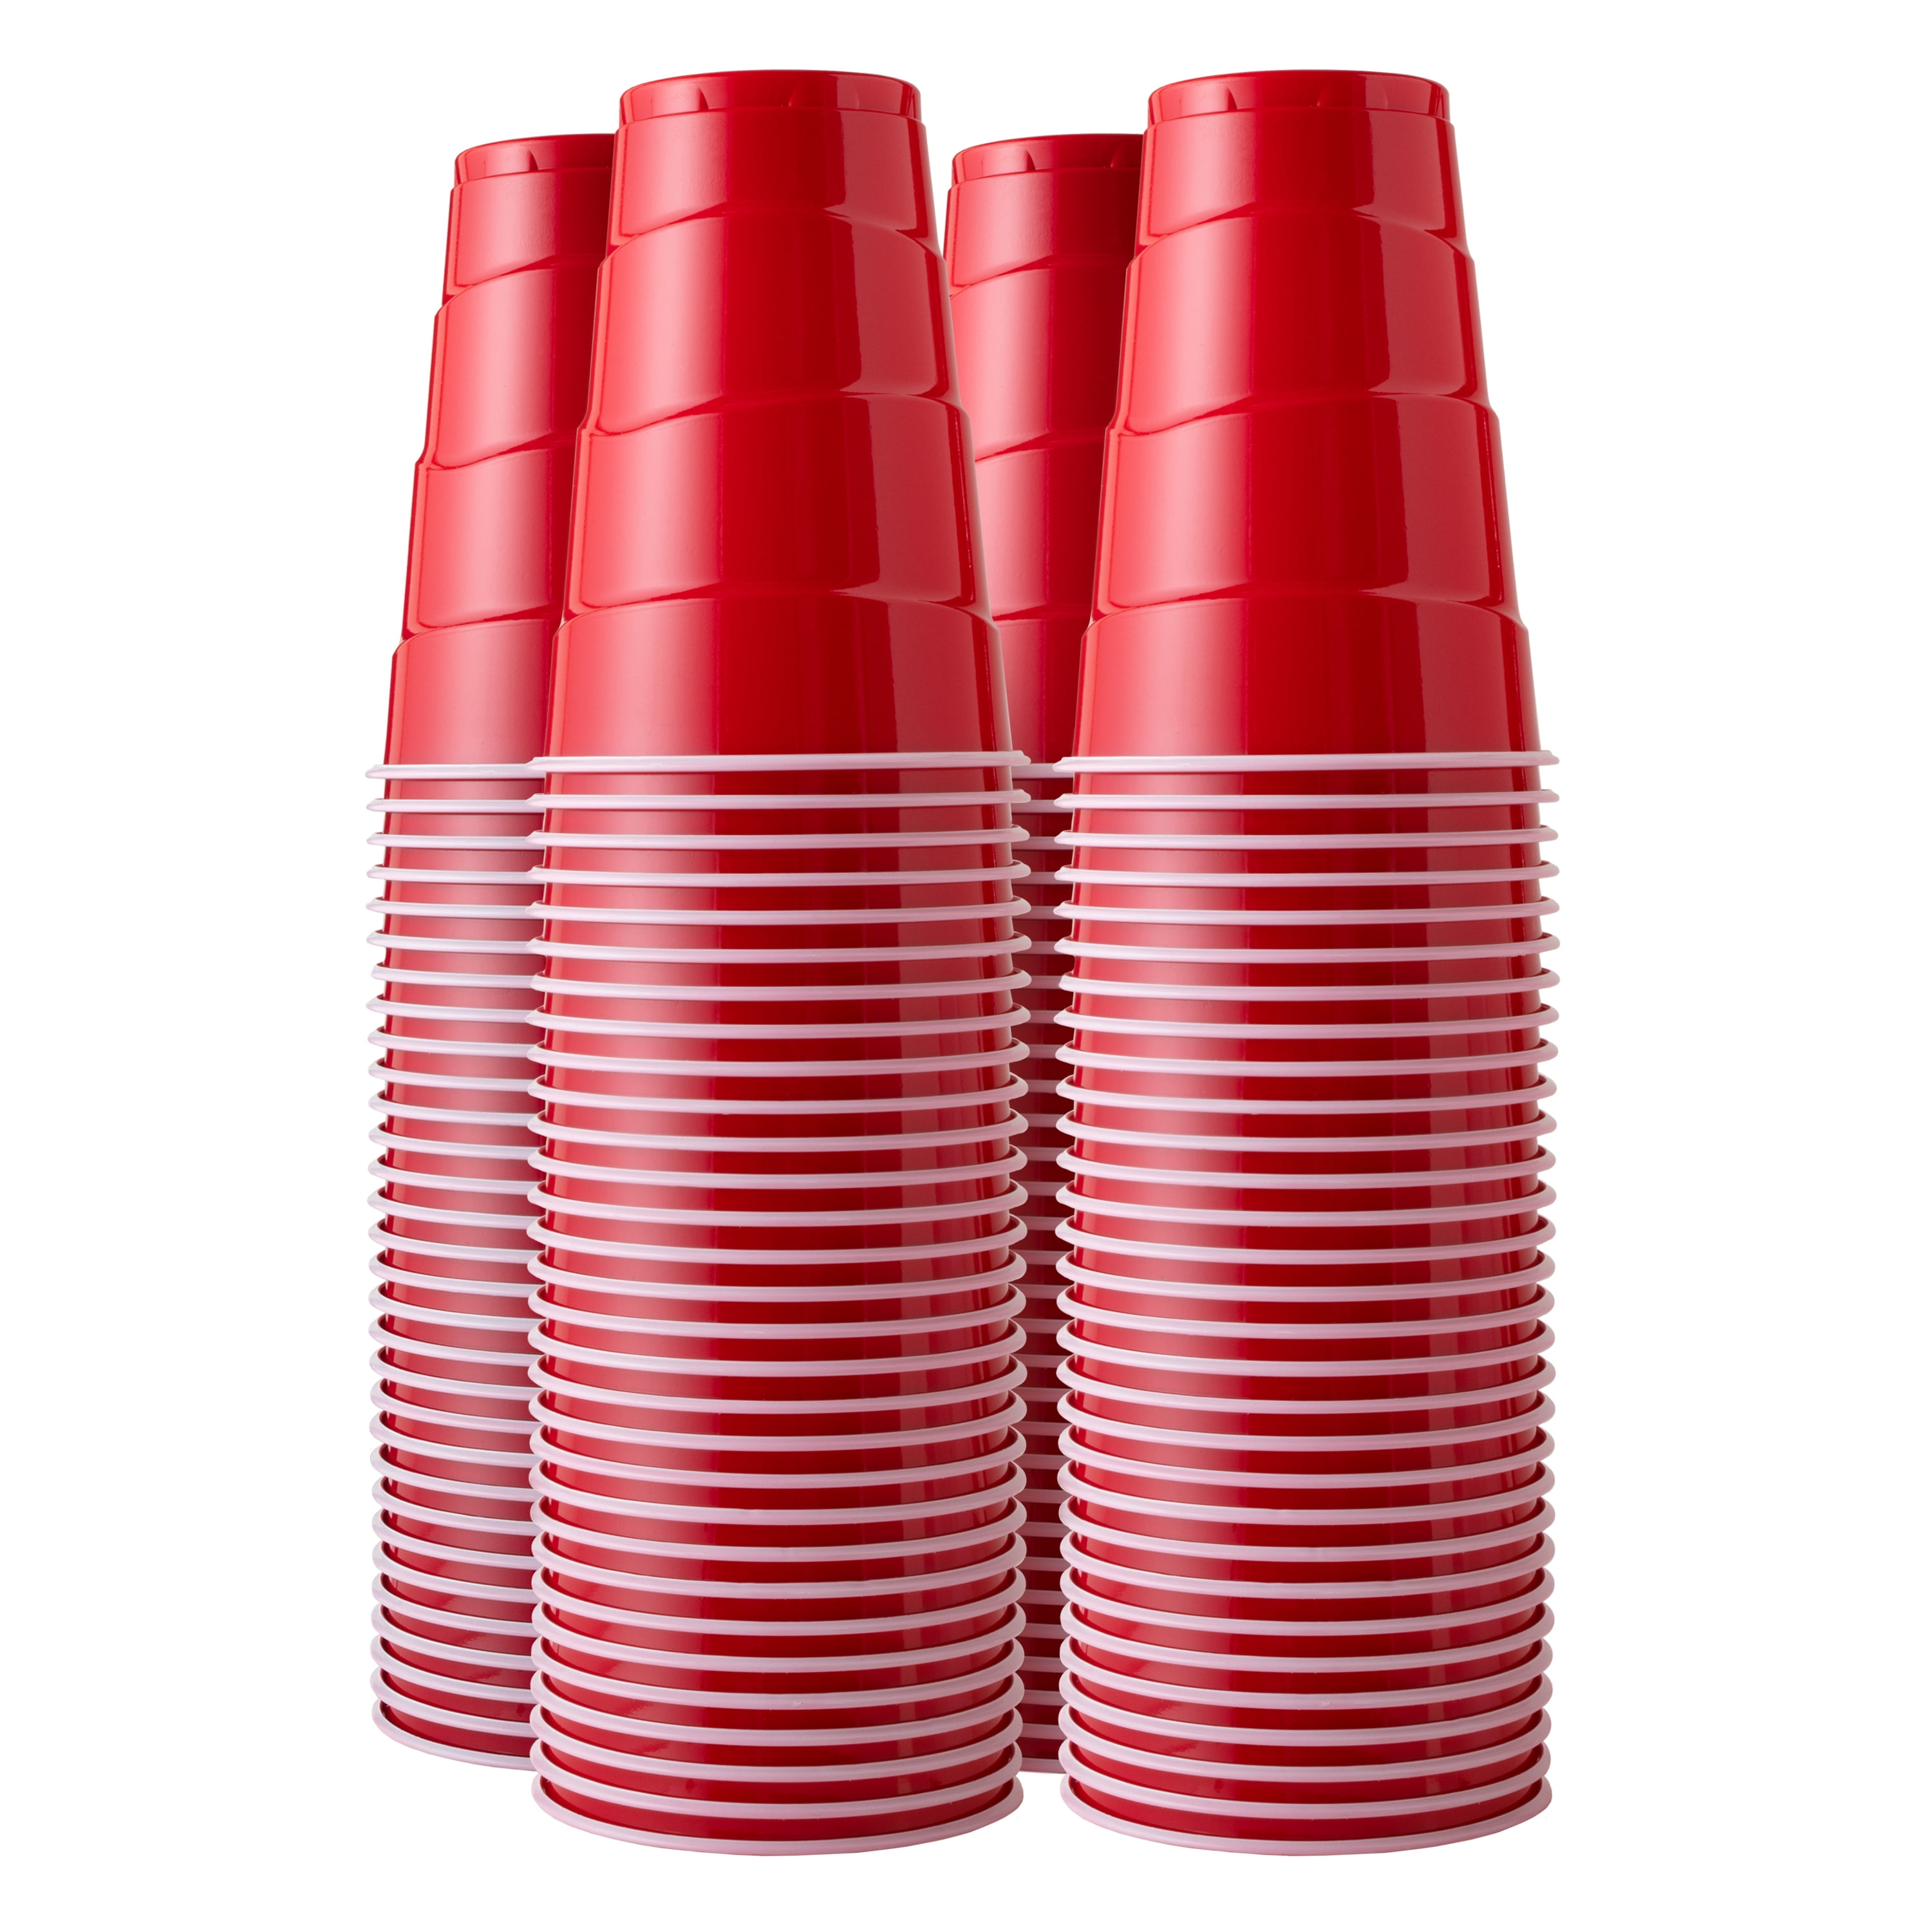 StarMar 18 oz Red Plastic Cups, [50 Pack] Large Cups, Party Cup Disposable  Cup Big Birthday Party Cups…